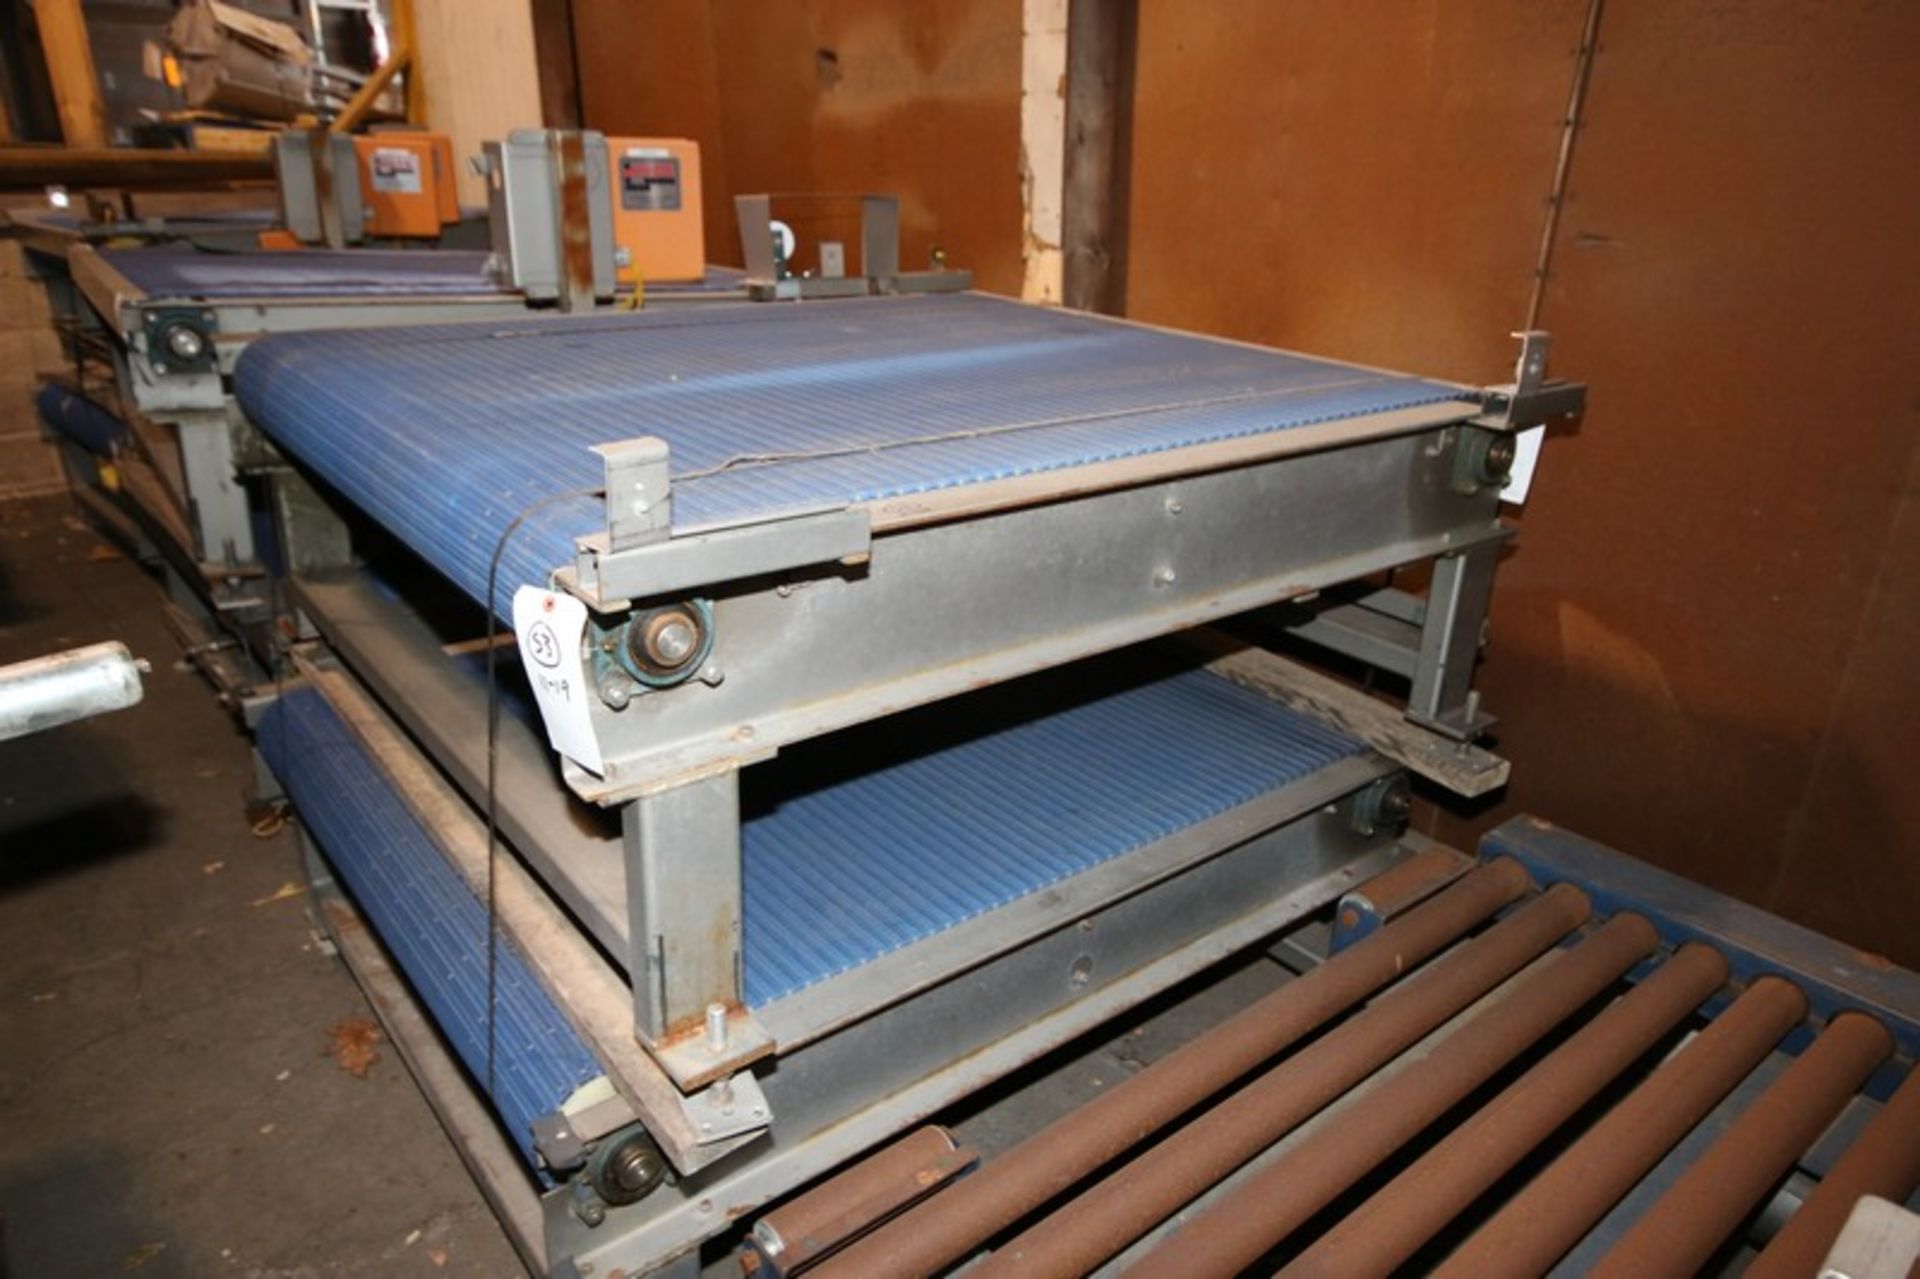 6-Sections of H&CS Conveyors, Overall Dims.:Aprox. 60" L x 64" W x 36" H, with Plastic Blue Belt, - Image 5 of 7